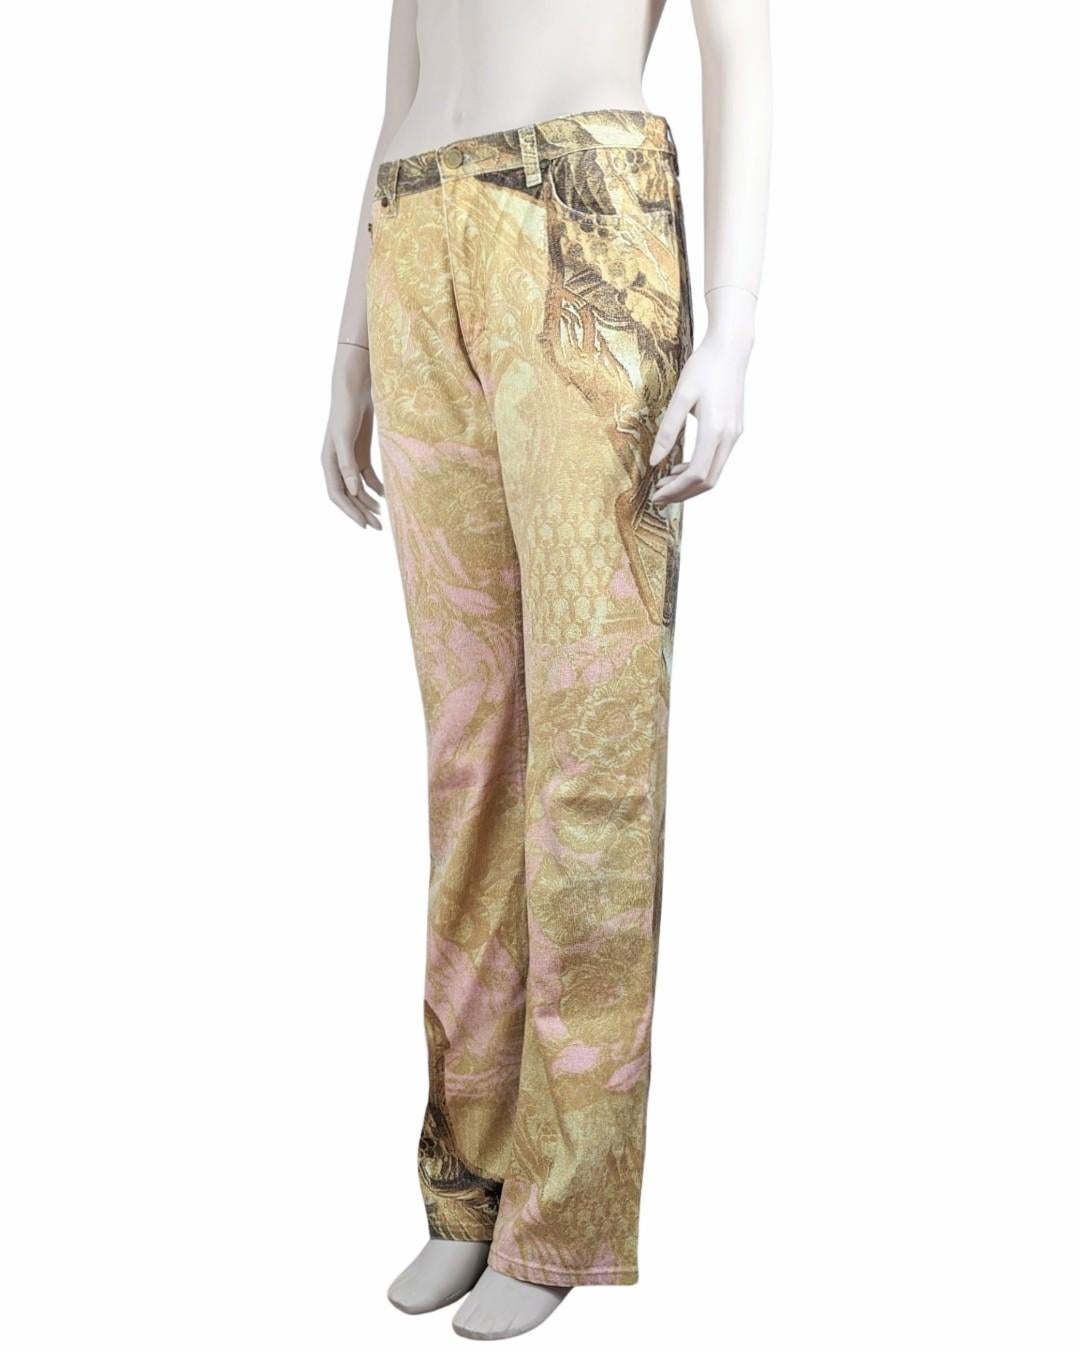 Roberto Cavalli F/W 2001 Gold Leaf Jeans For Sale 2